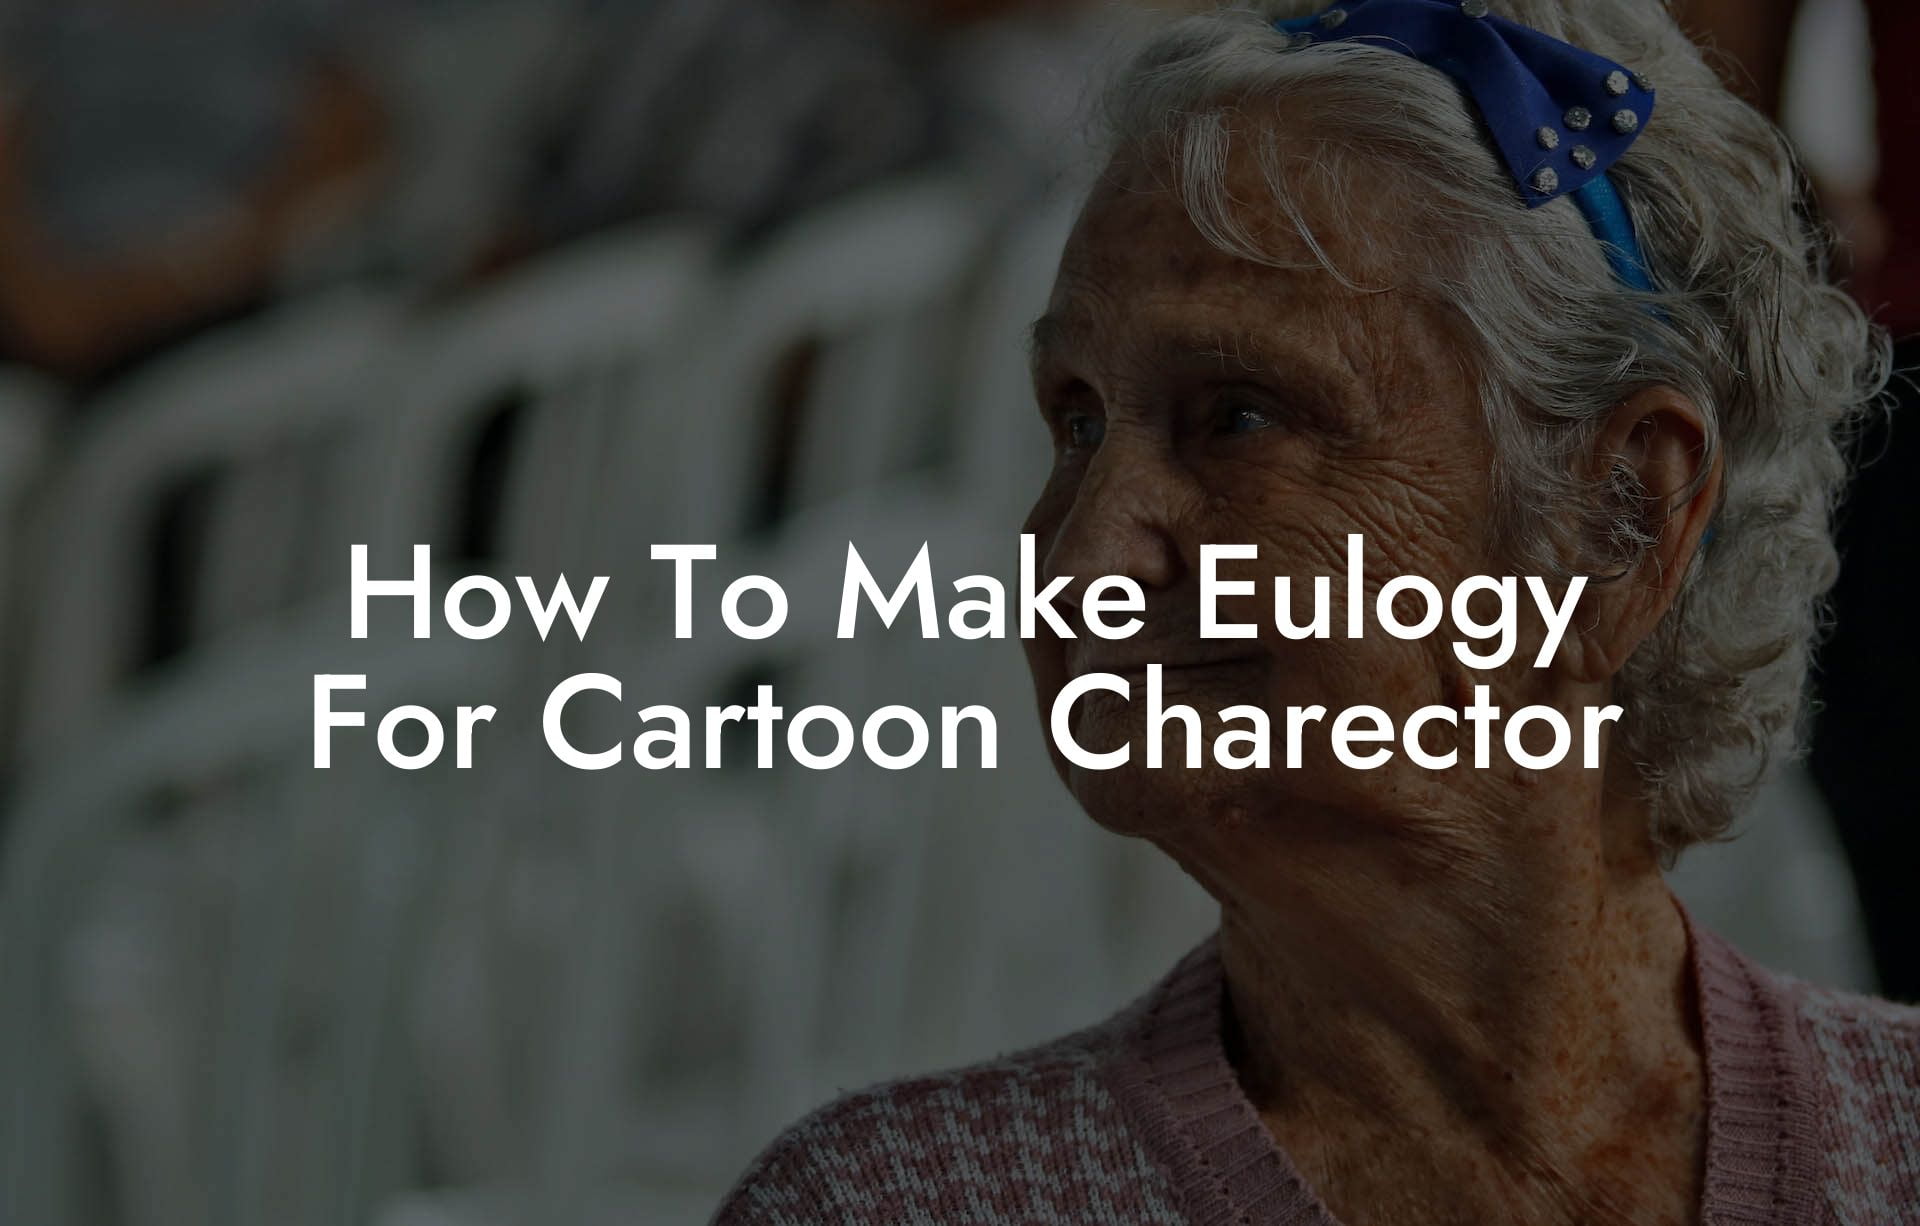 How To Make Eulogy For Cartoon Charector